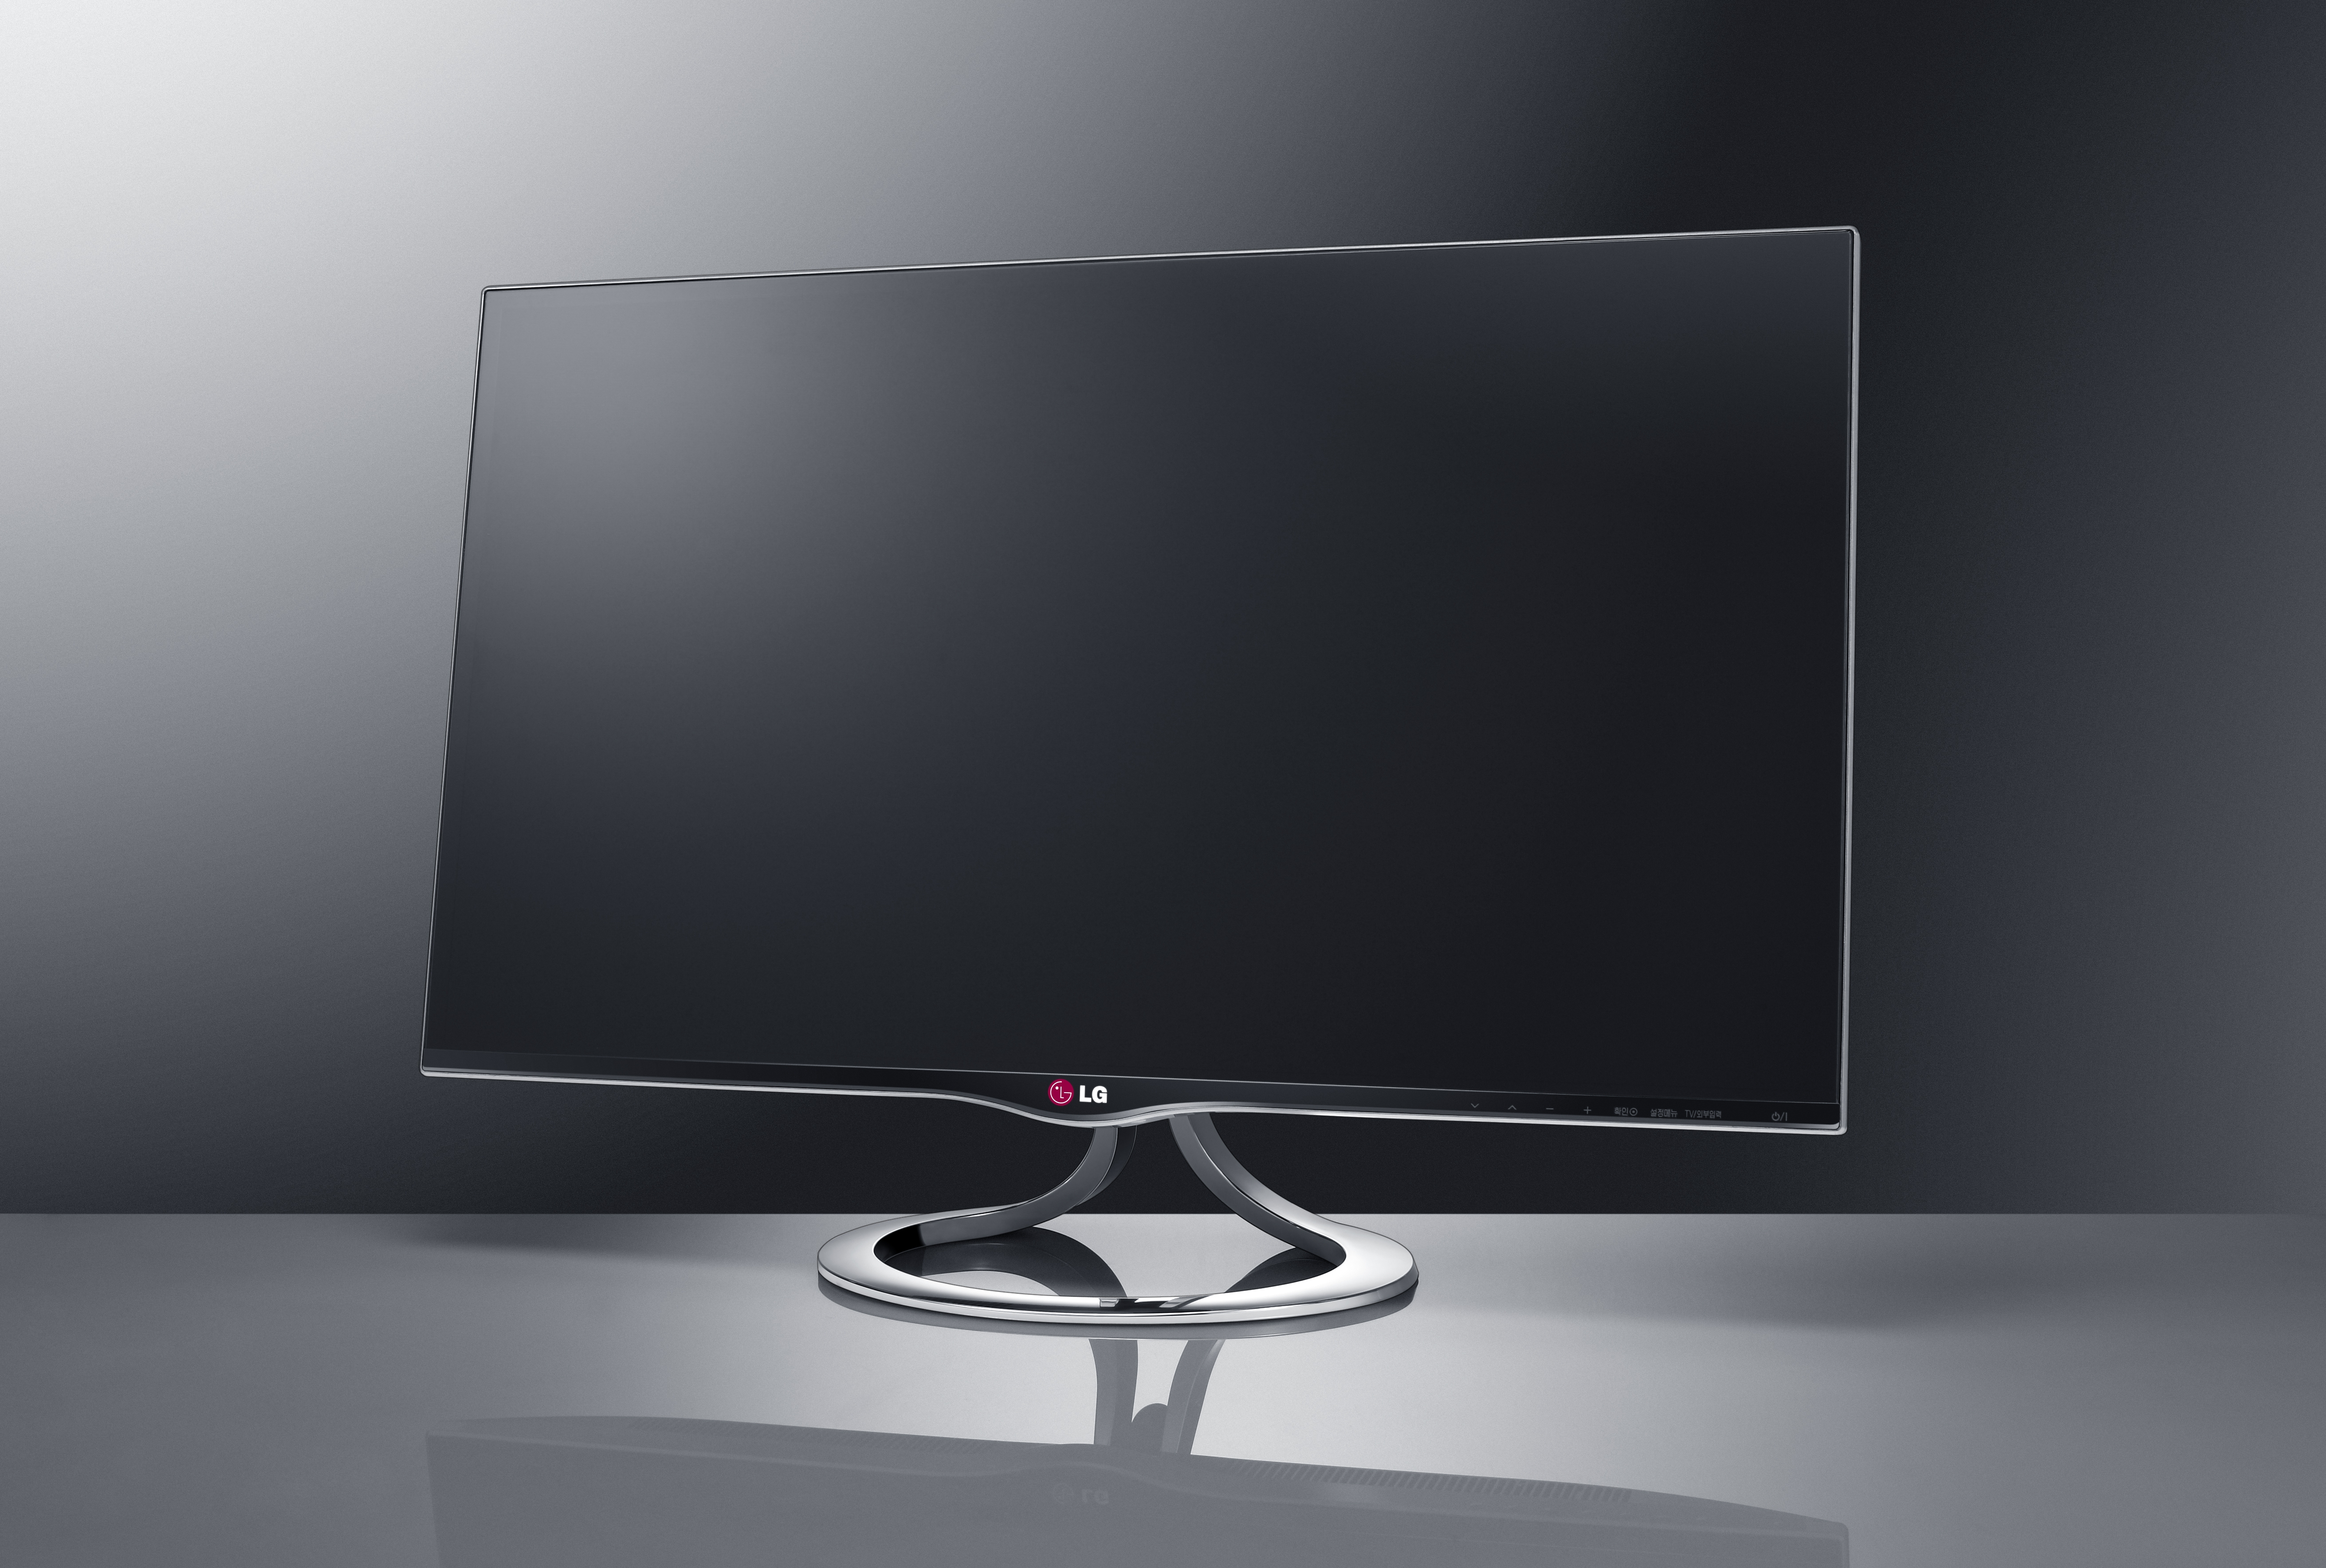 A right-side view of LG 27-inch IPS Personal Smart TV model MT93 in front of a gray background